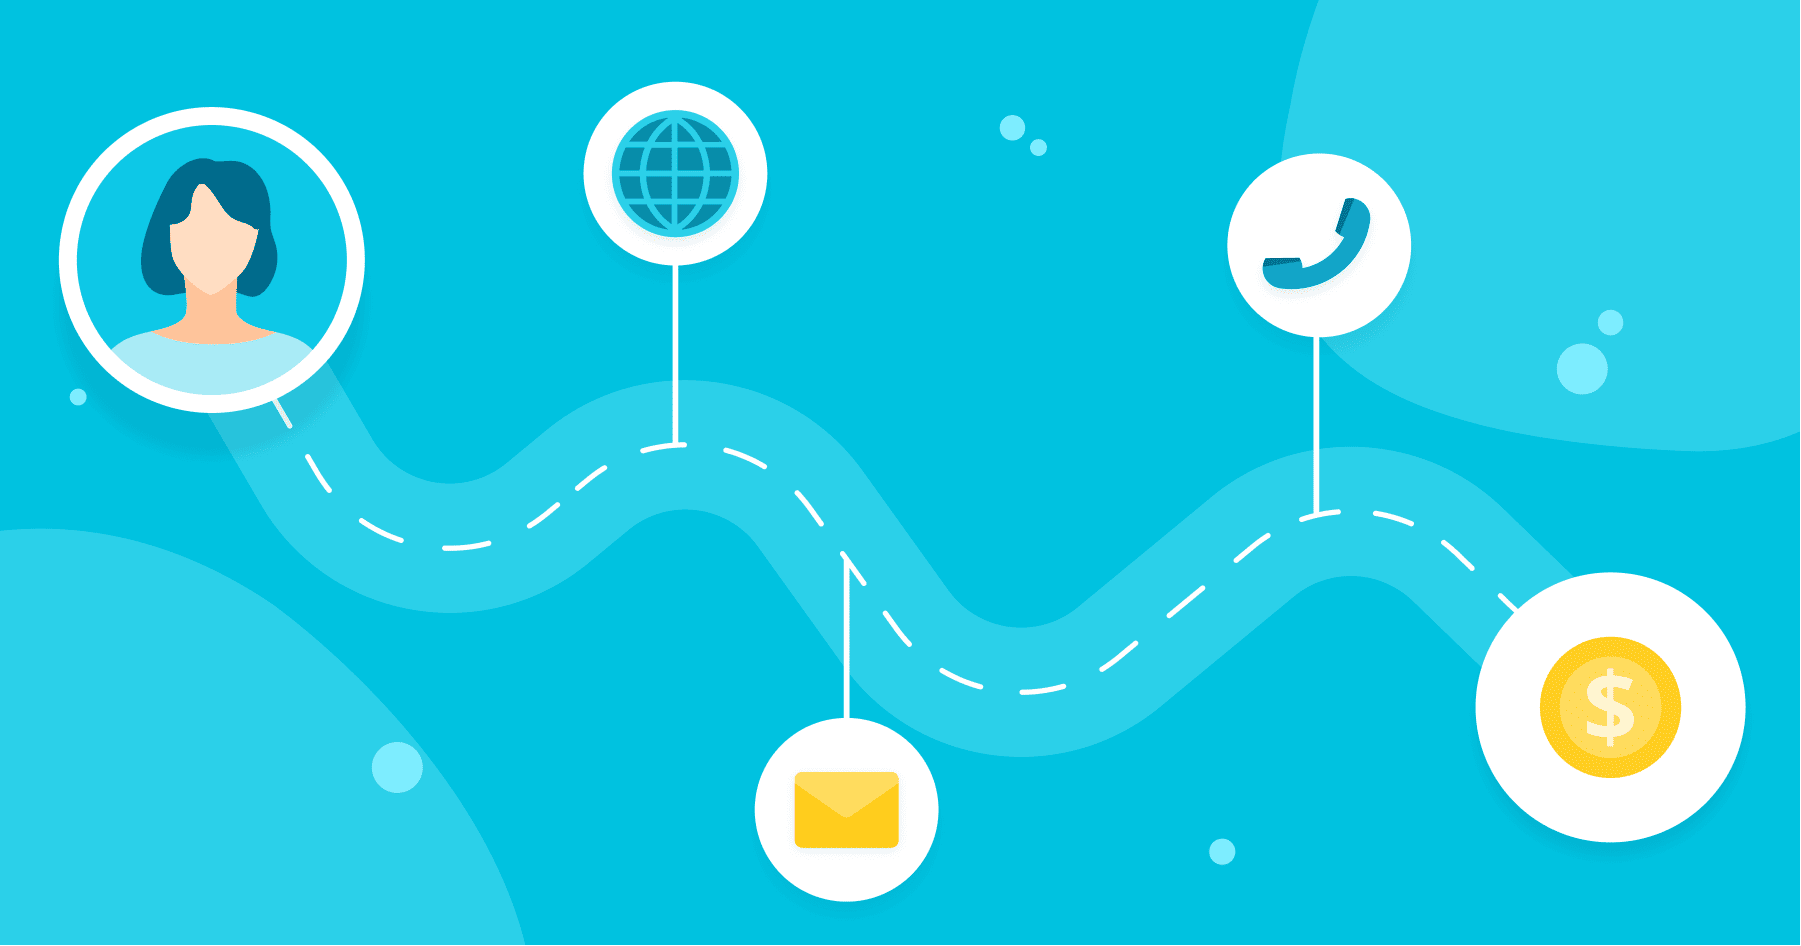 Here’s everything you need to know about customer journeys, what they are, and how to create them efficiently and accurately.